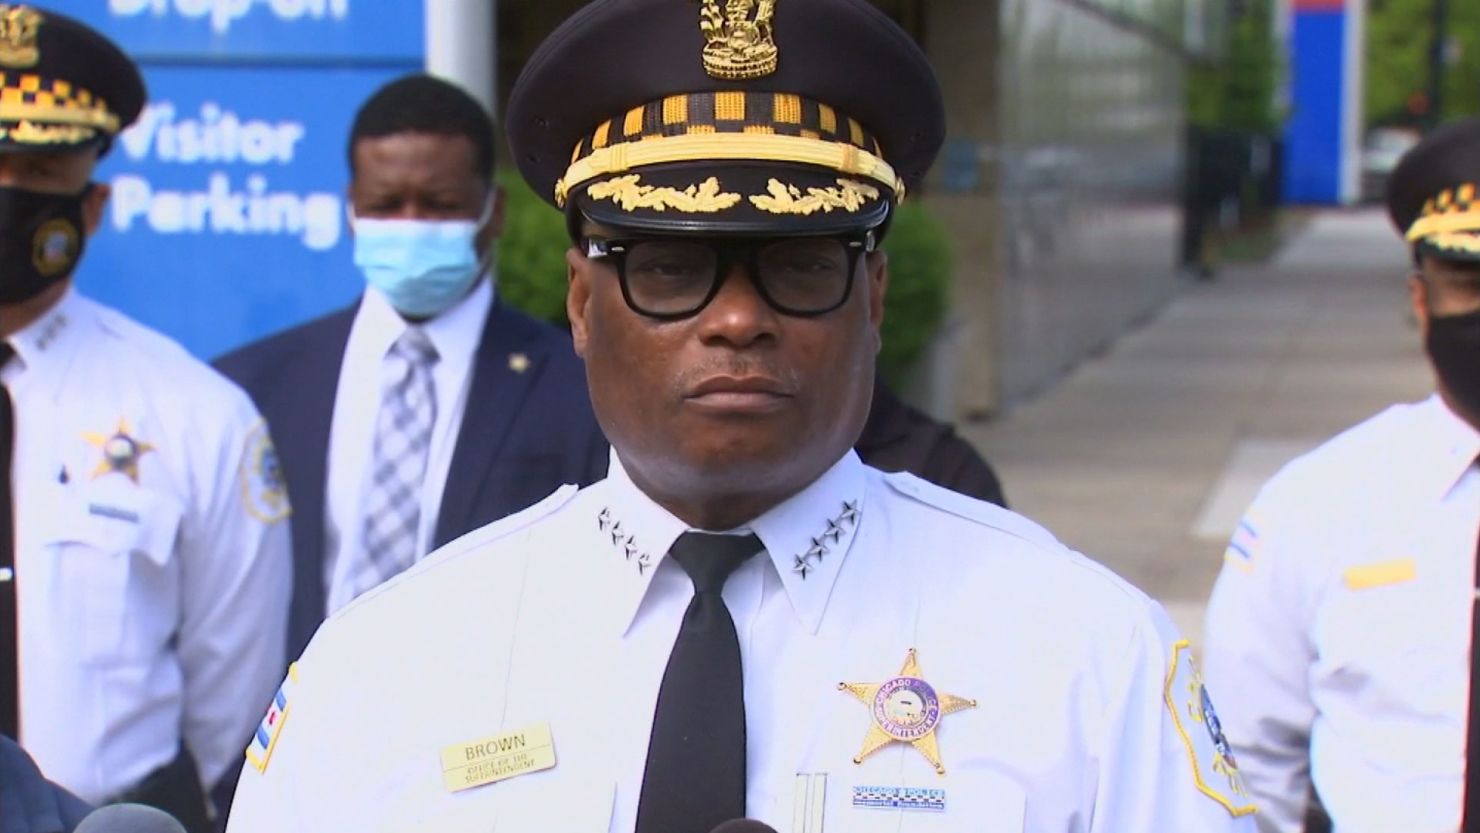 Chicago Police Superintendent David Brown said two officers were shot by a suspect on Sunday.